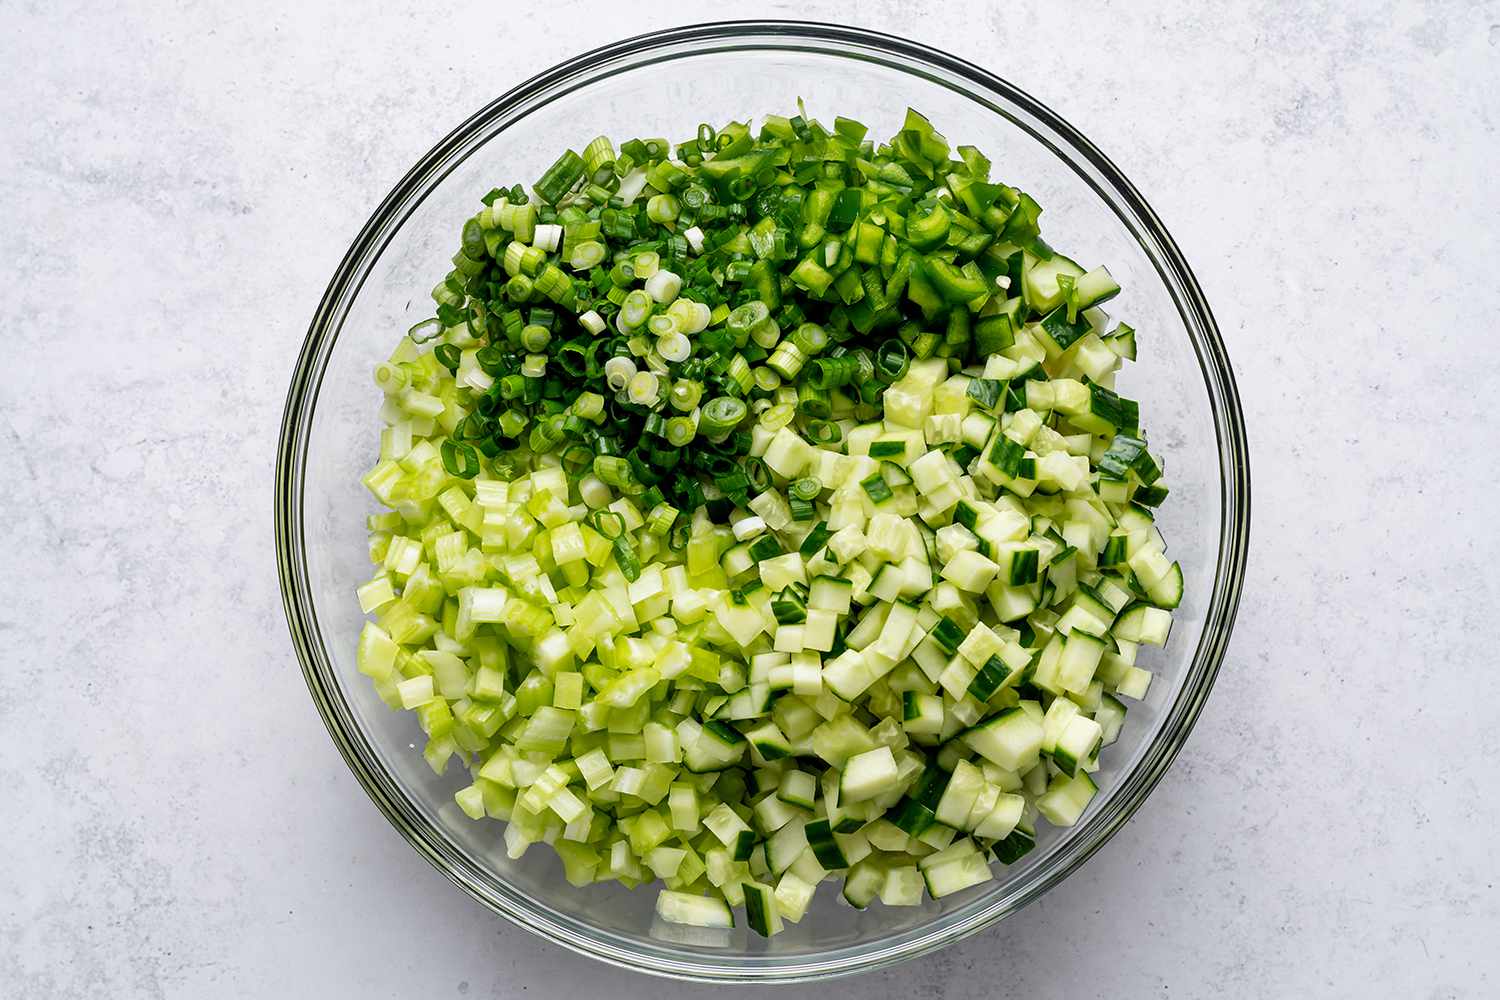 Diced celery, cucumbers, peppers, and green onions added to the cabbage